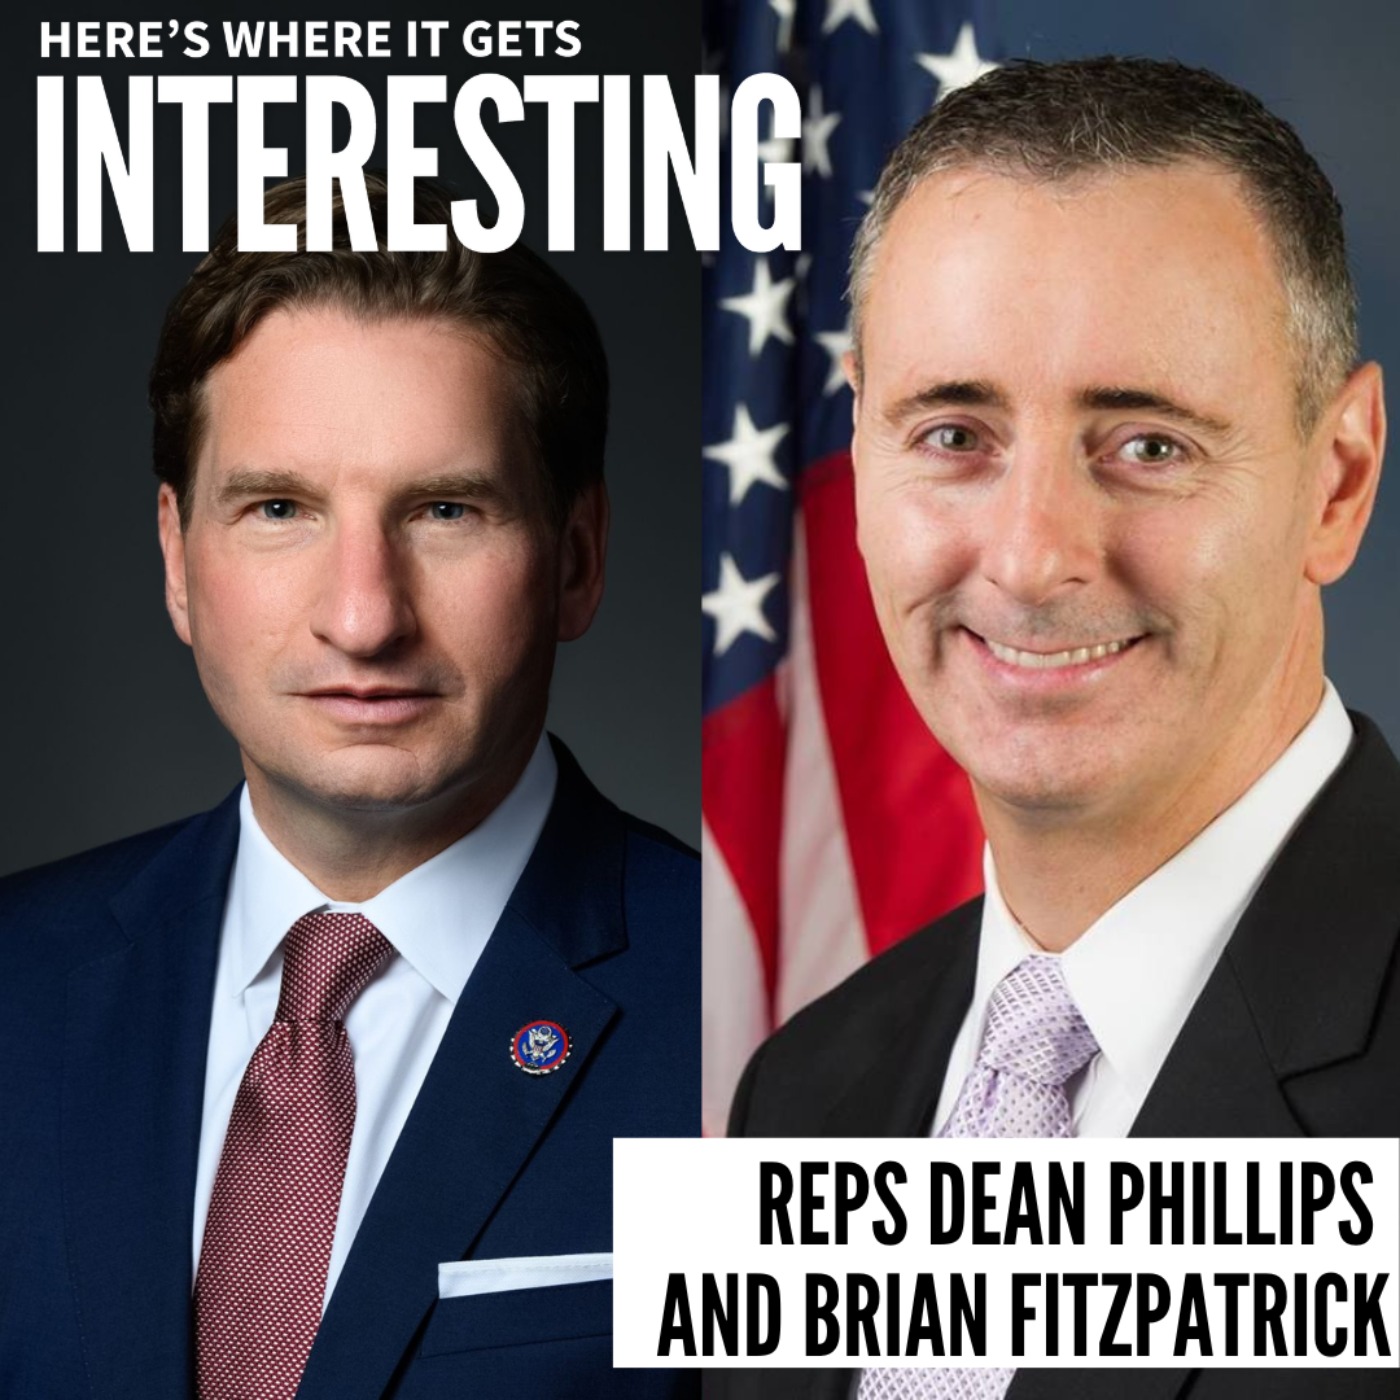 Bridging the Divide with Representatives Phillips (D) and Fitzpatrick (R)